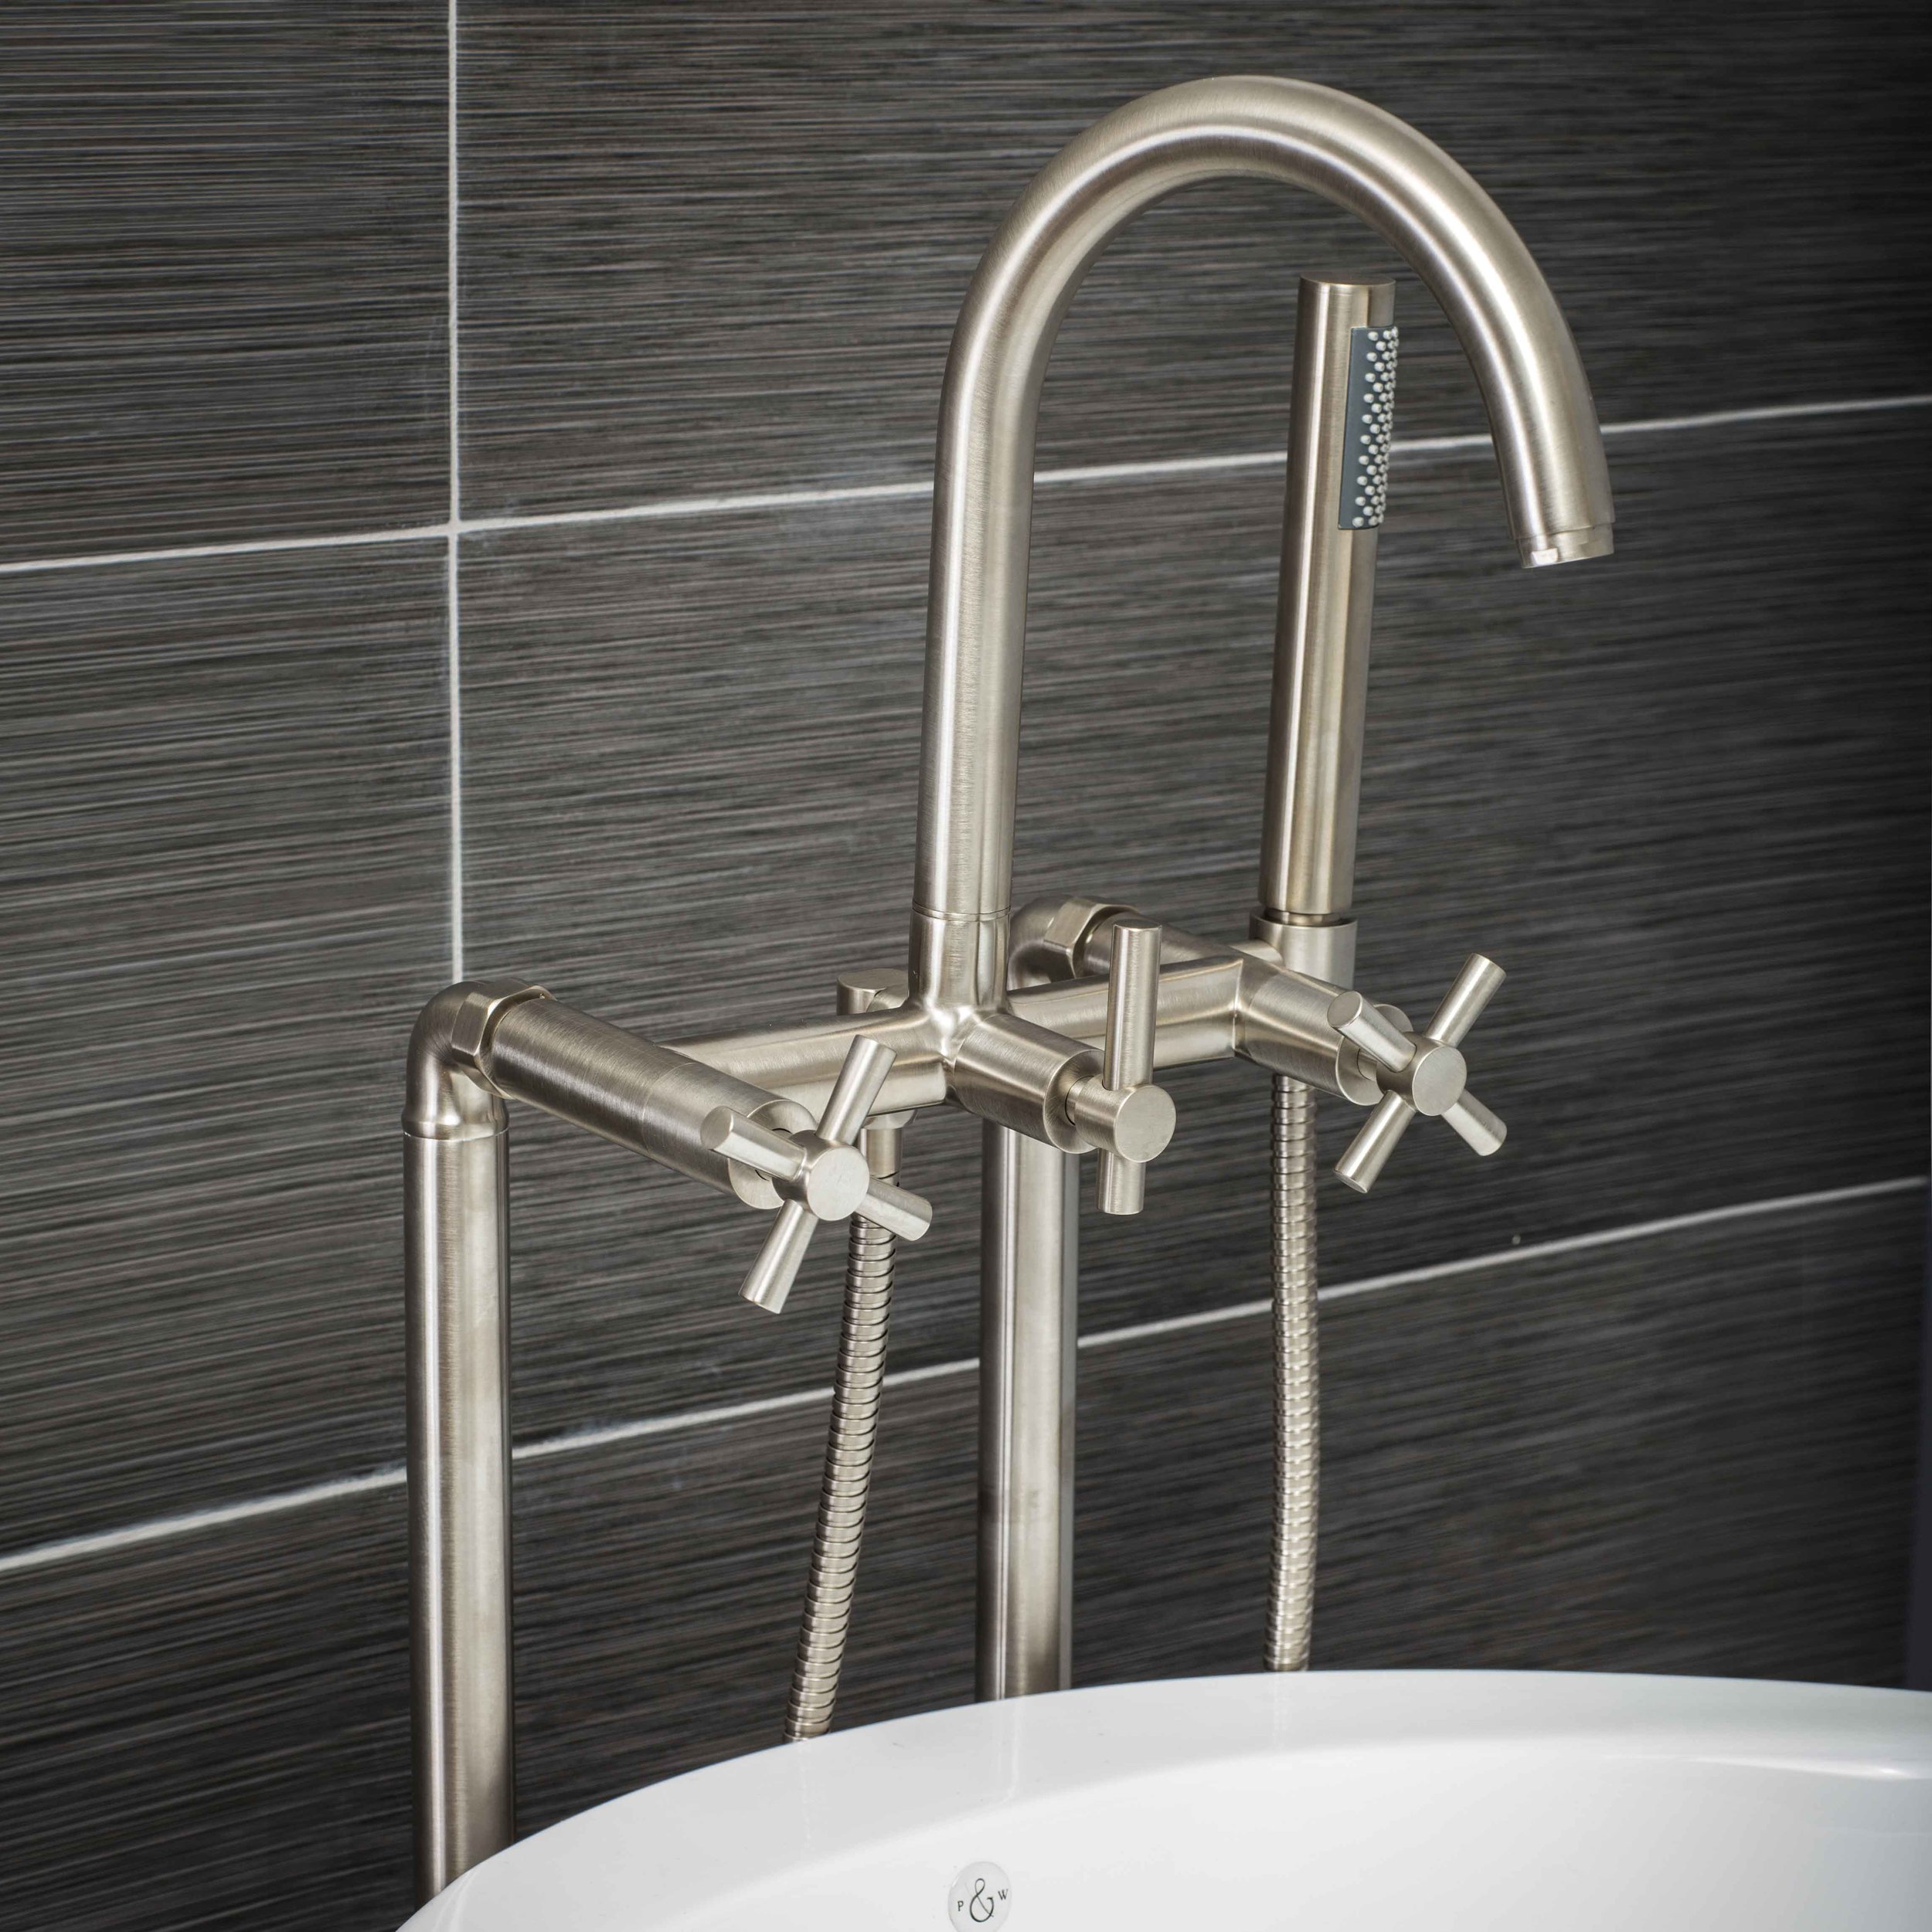 Contemporary Floor Mount Tub Filler Faucet In Brushed Nickel With